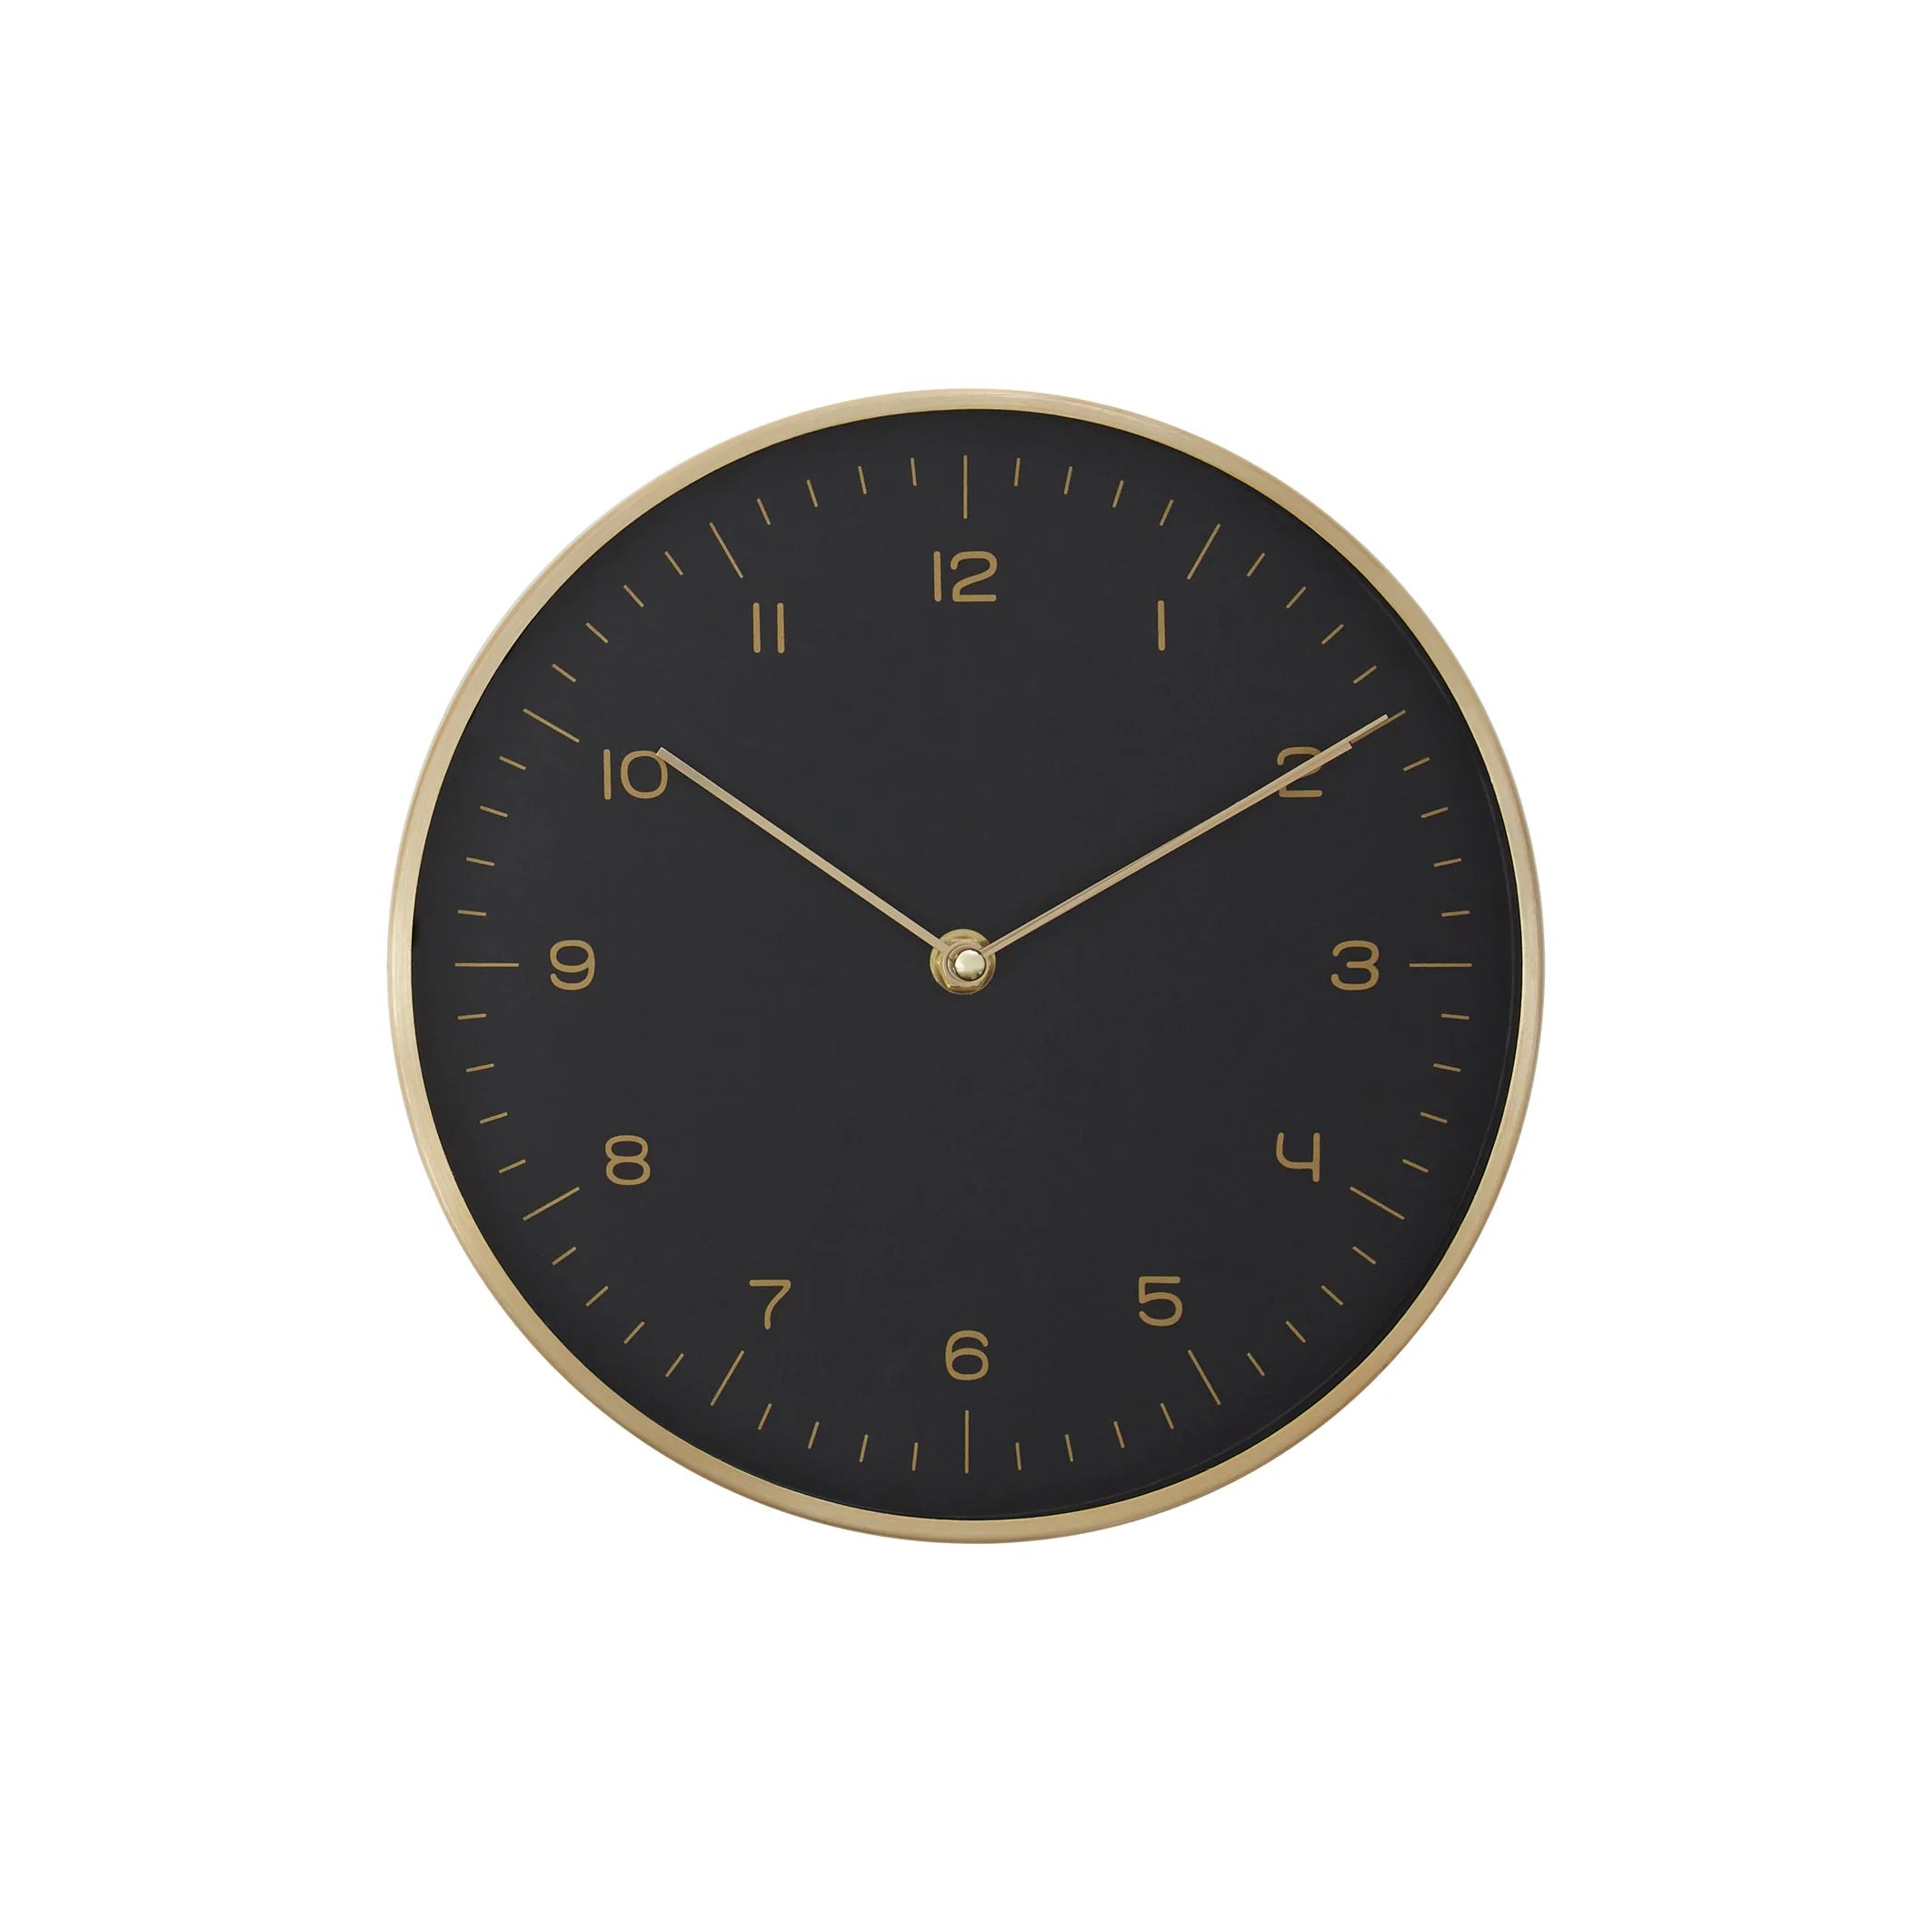 25cm Black and Gold Wall Clock | La Redoute (UK)